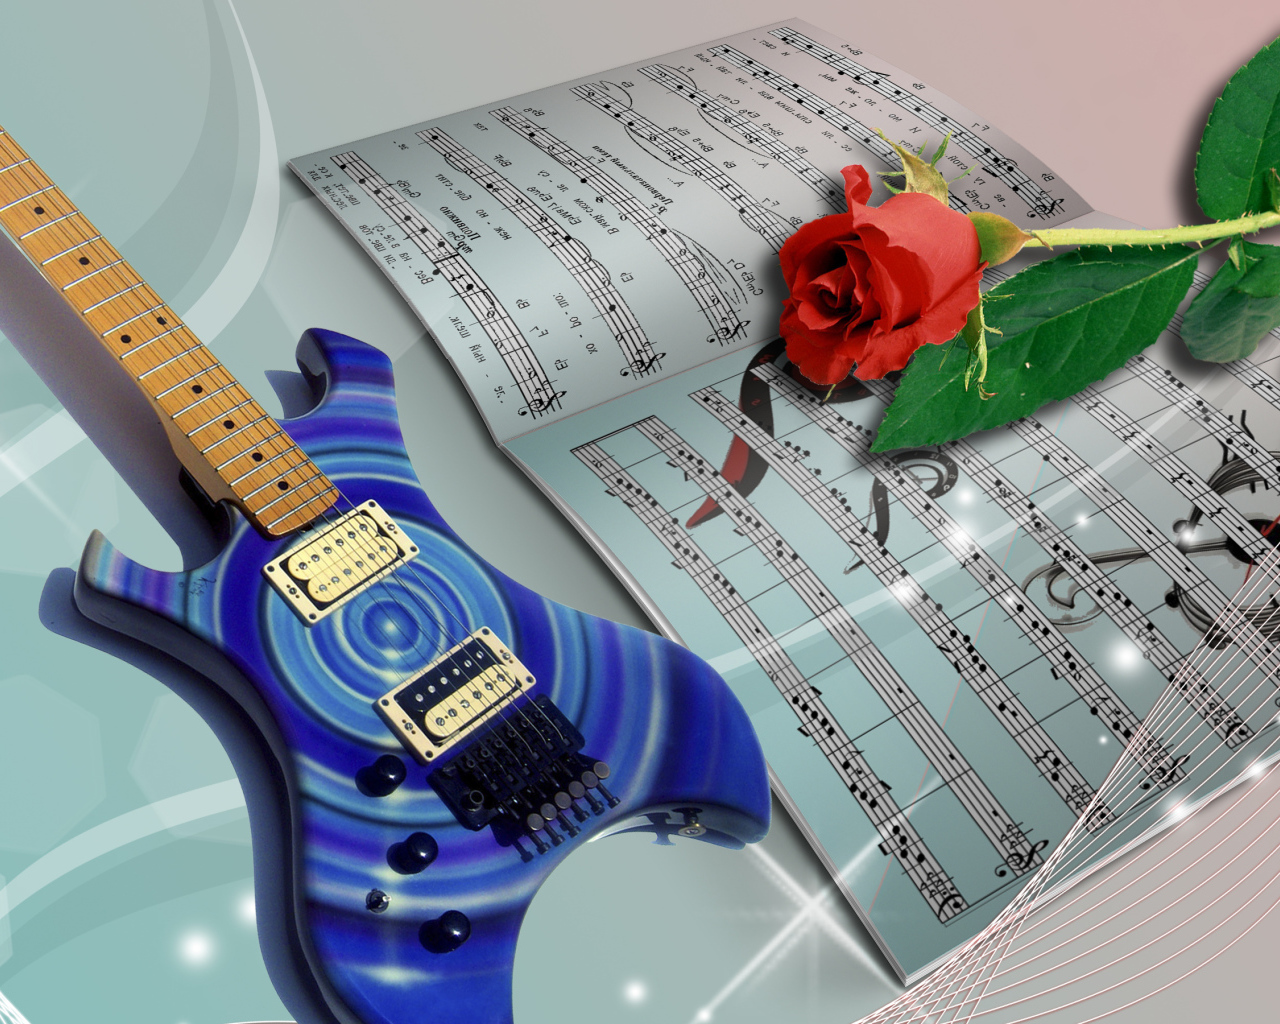 	   Guitar and rose on the notes